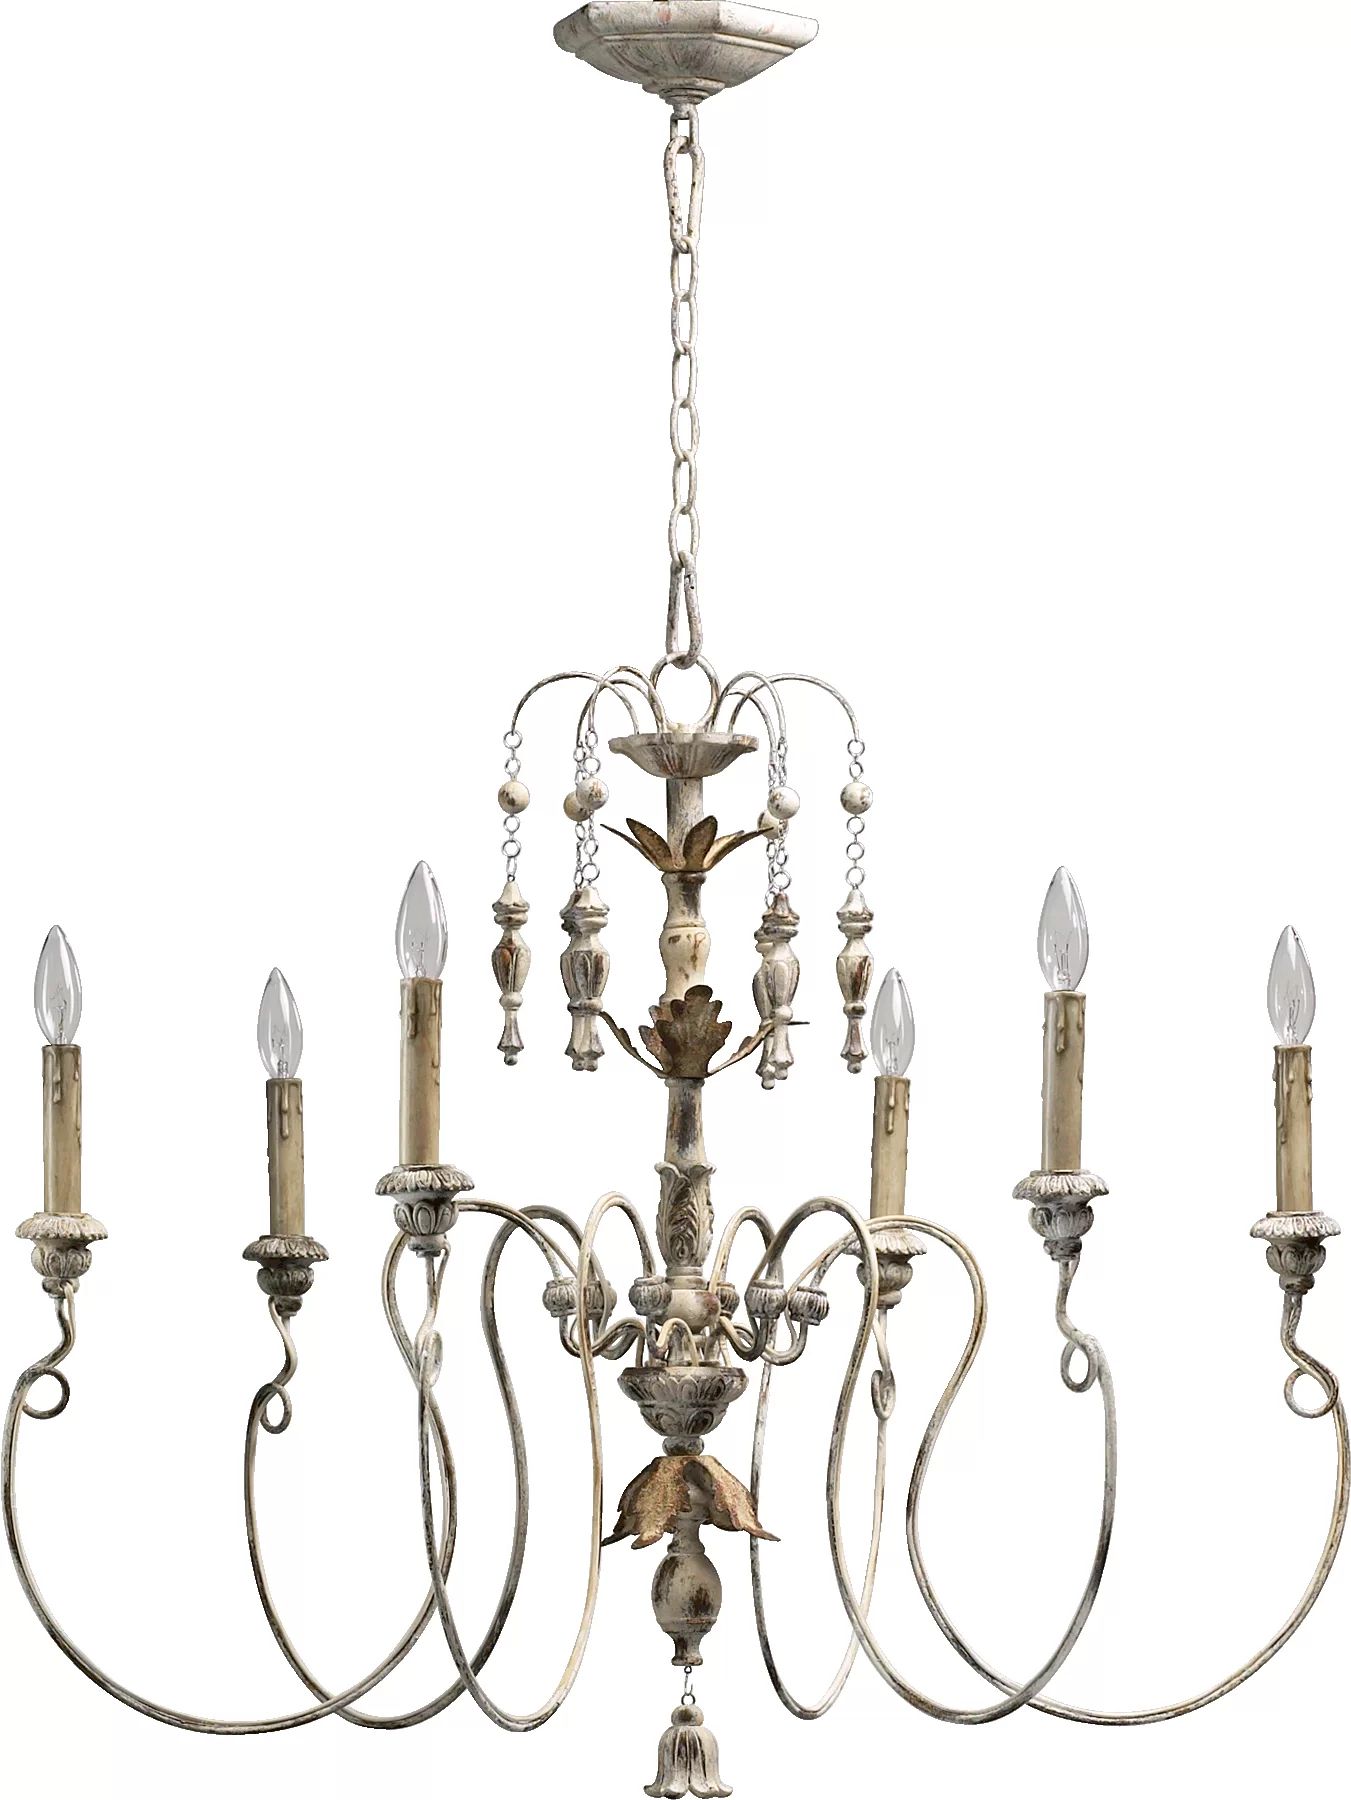 Paladino 6-Light Candle Style Classic / Traditional Chandelier | Wayfair North America